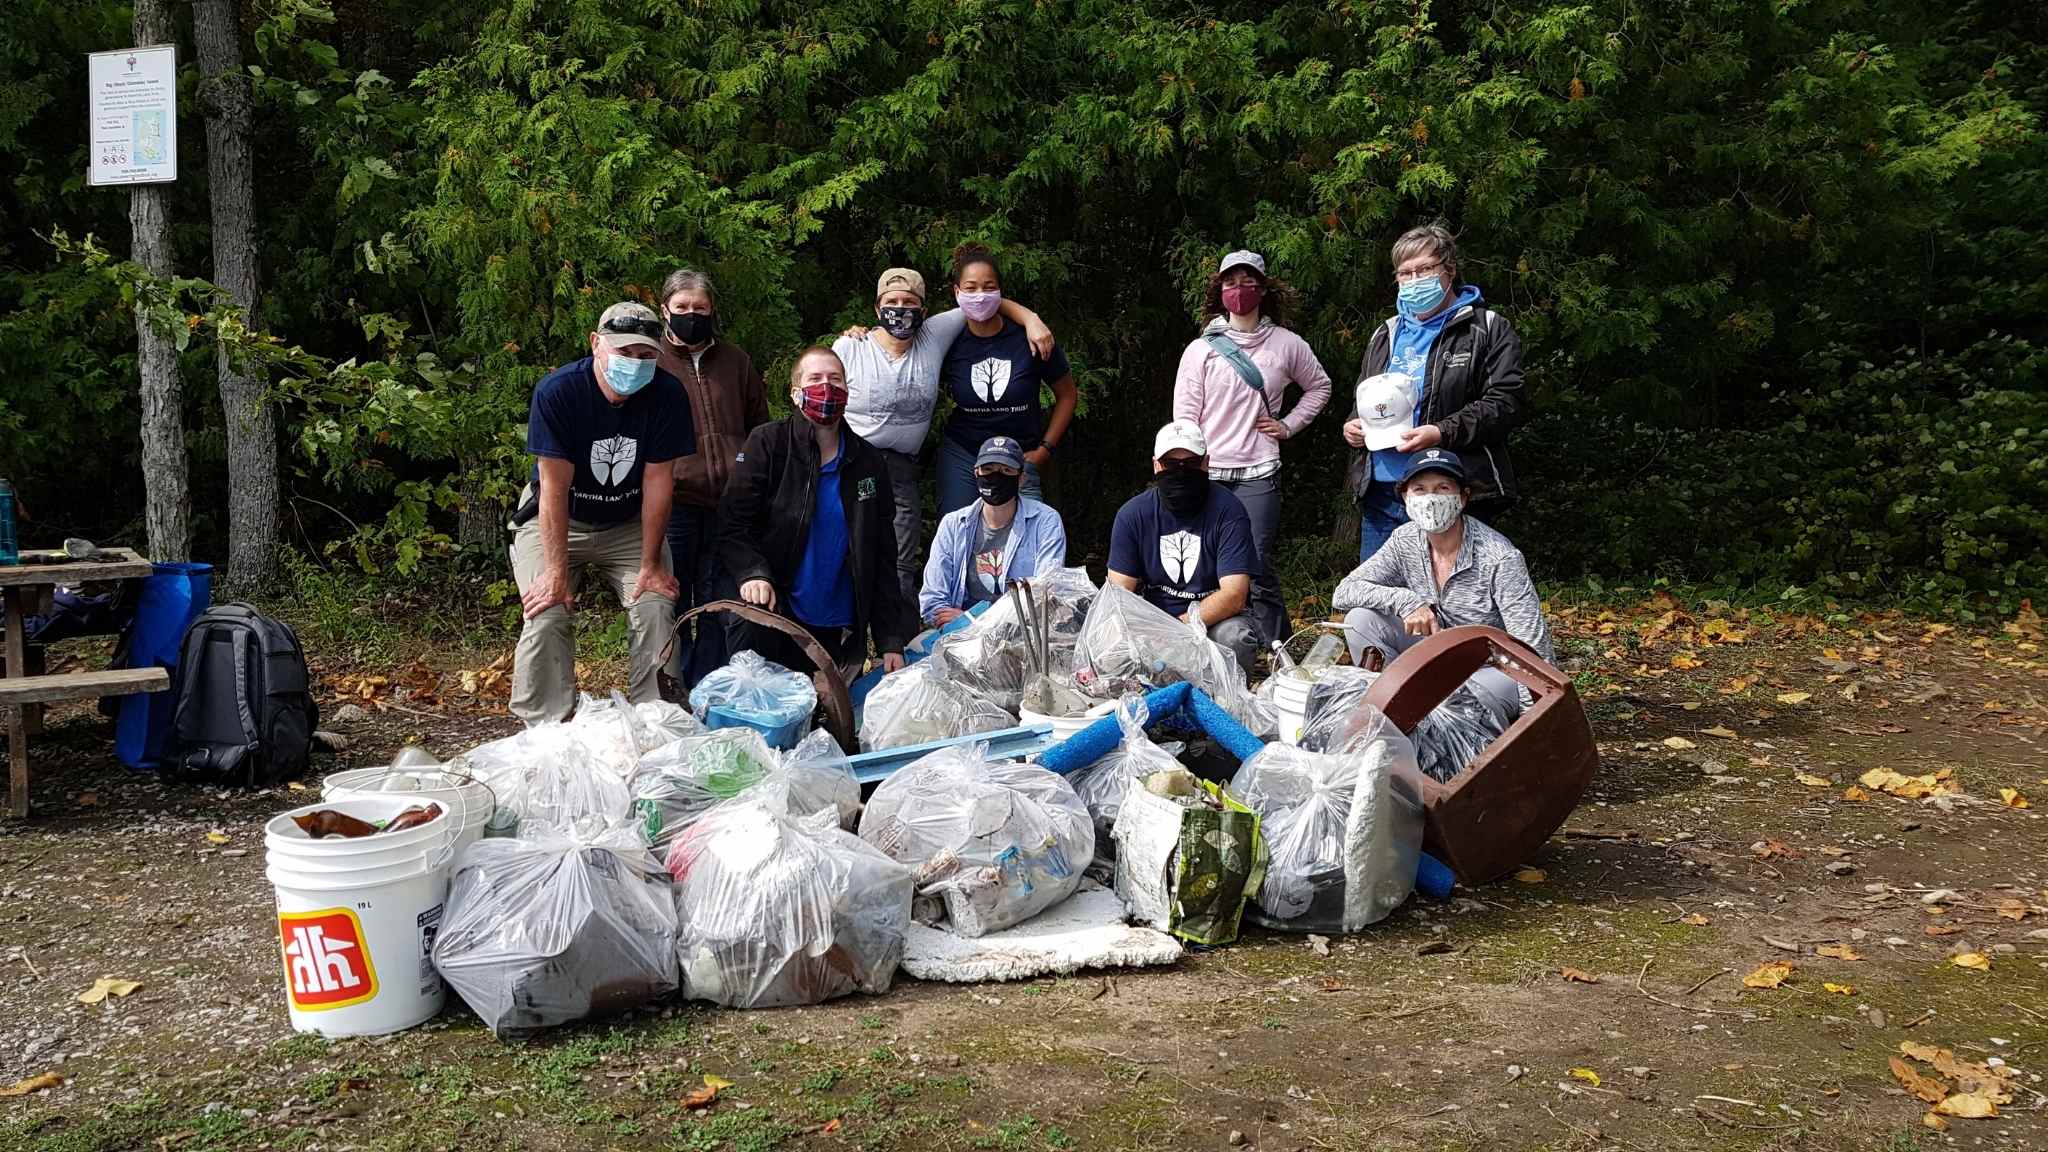 Volunteers and staff group shot beside the garbage they cleaned up from the shoreline